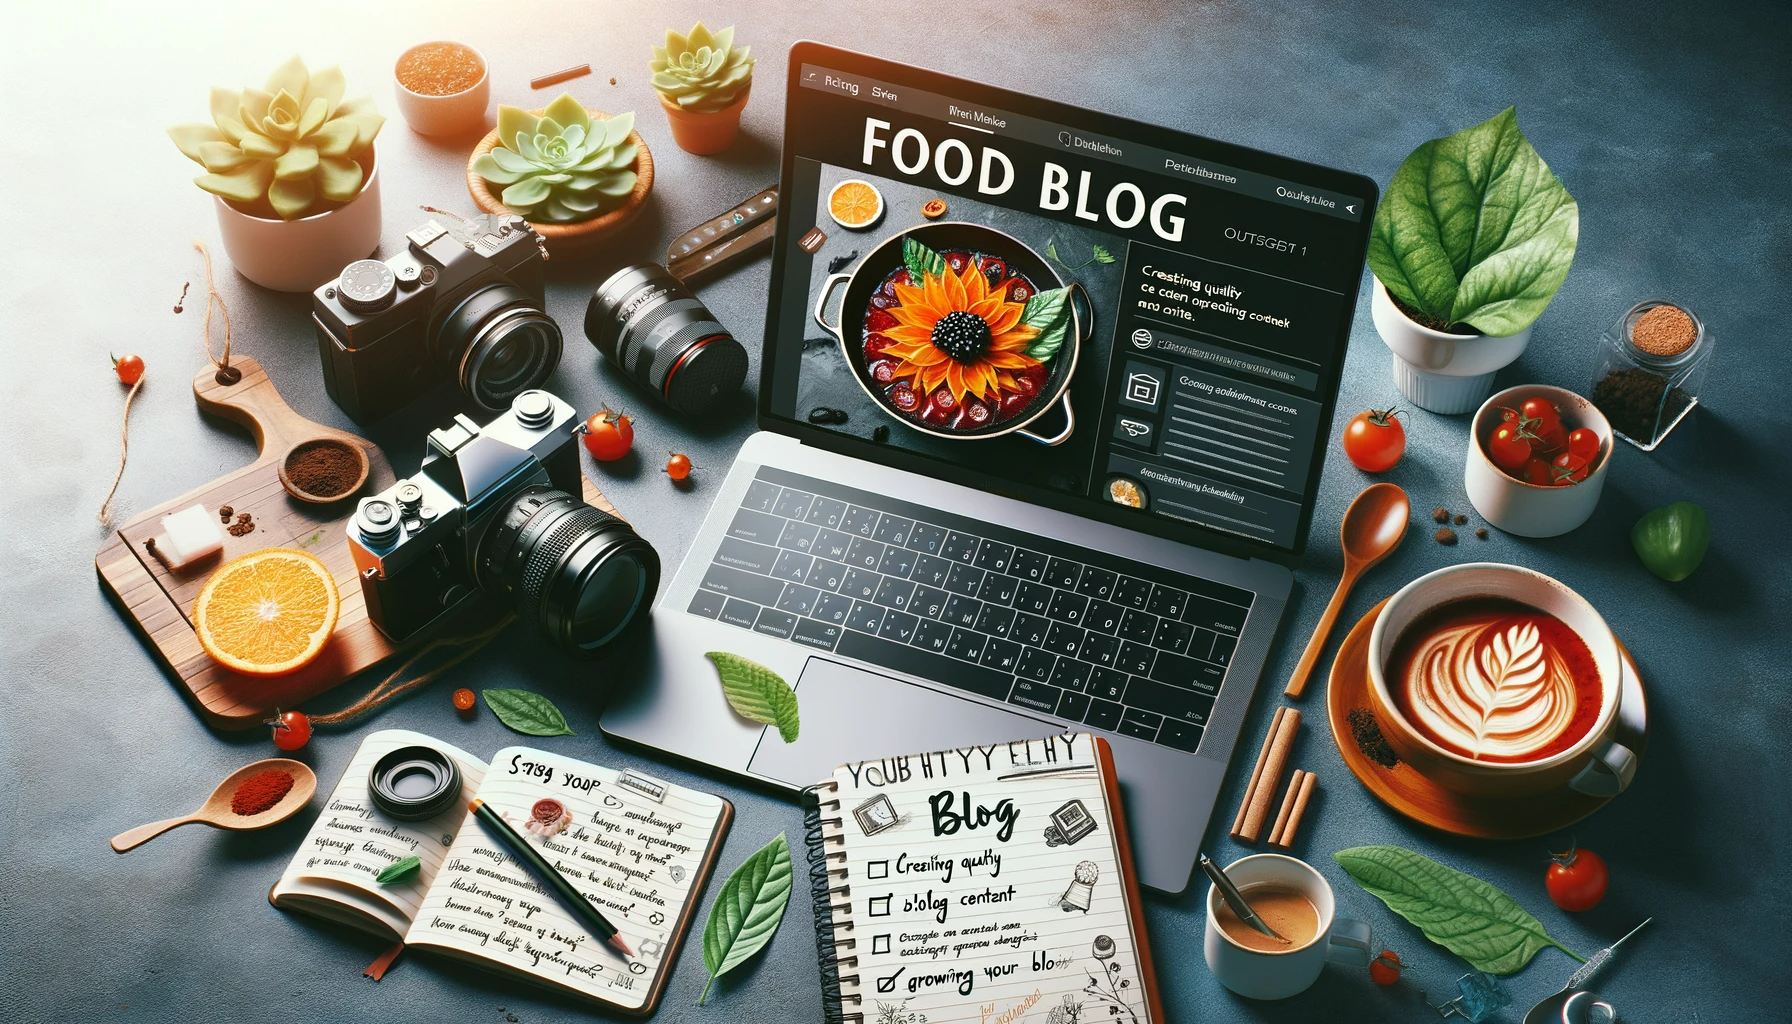 How to Start a Food Blog Tips on Creating Quality Blog Content and Growing Your Blog